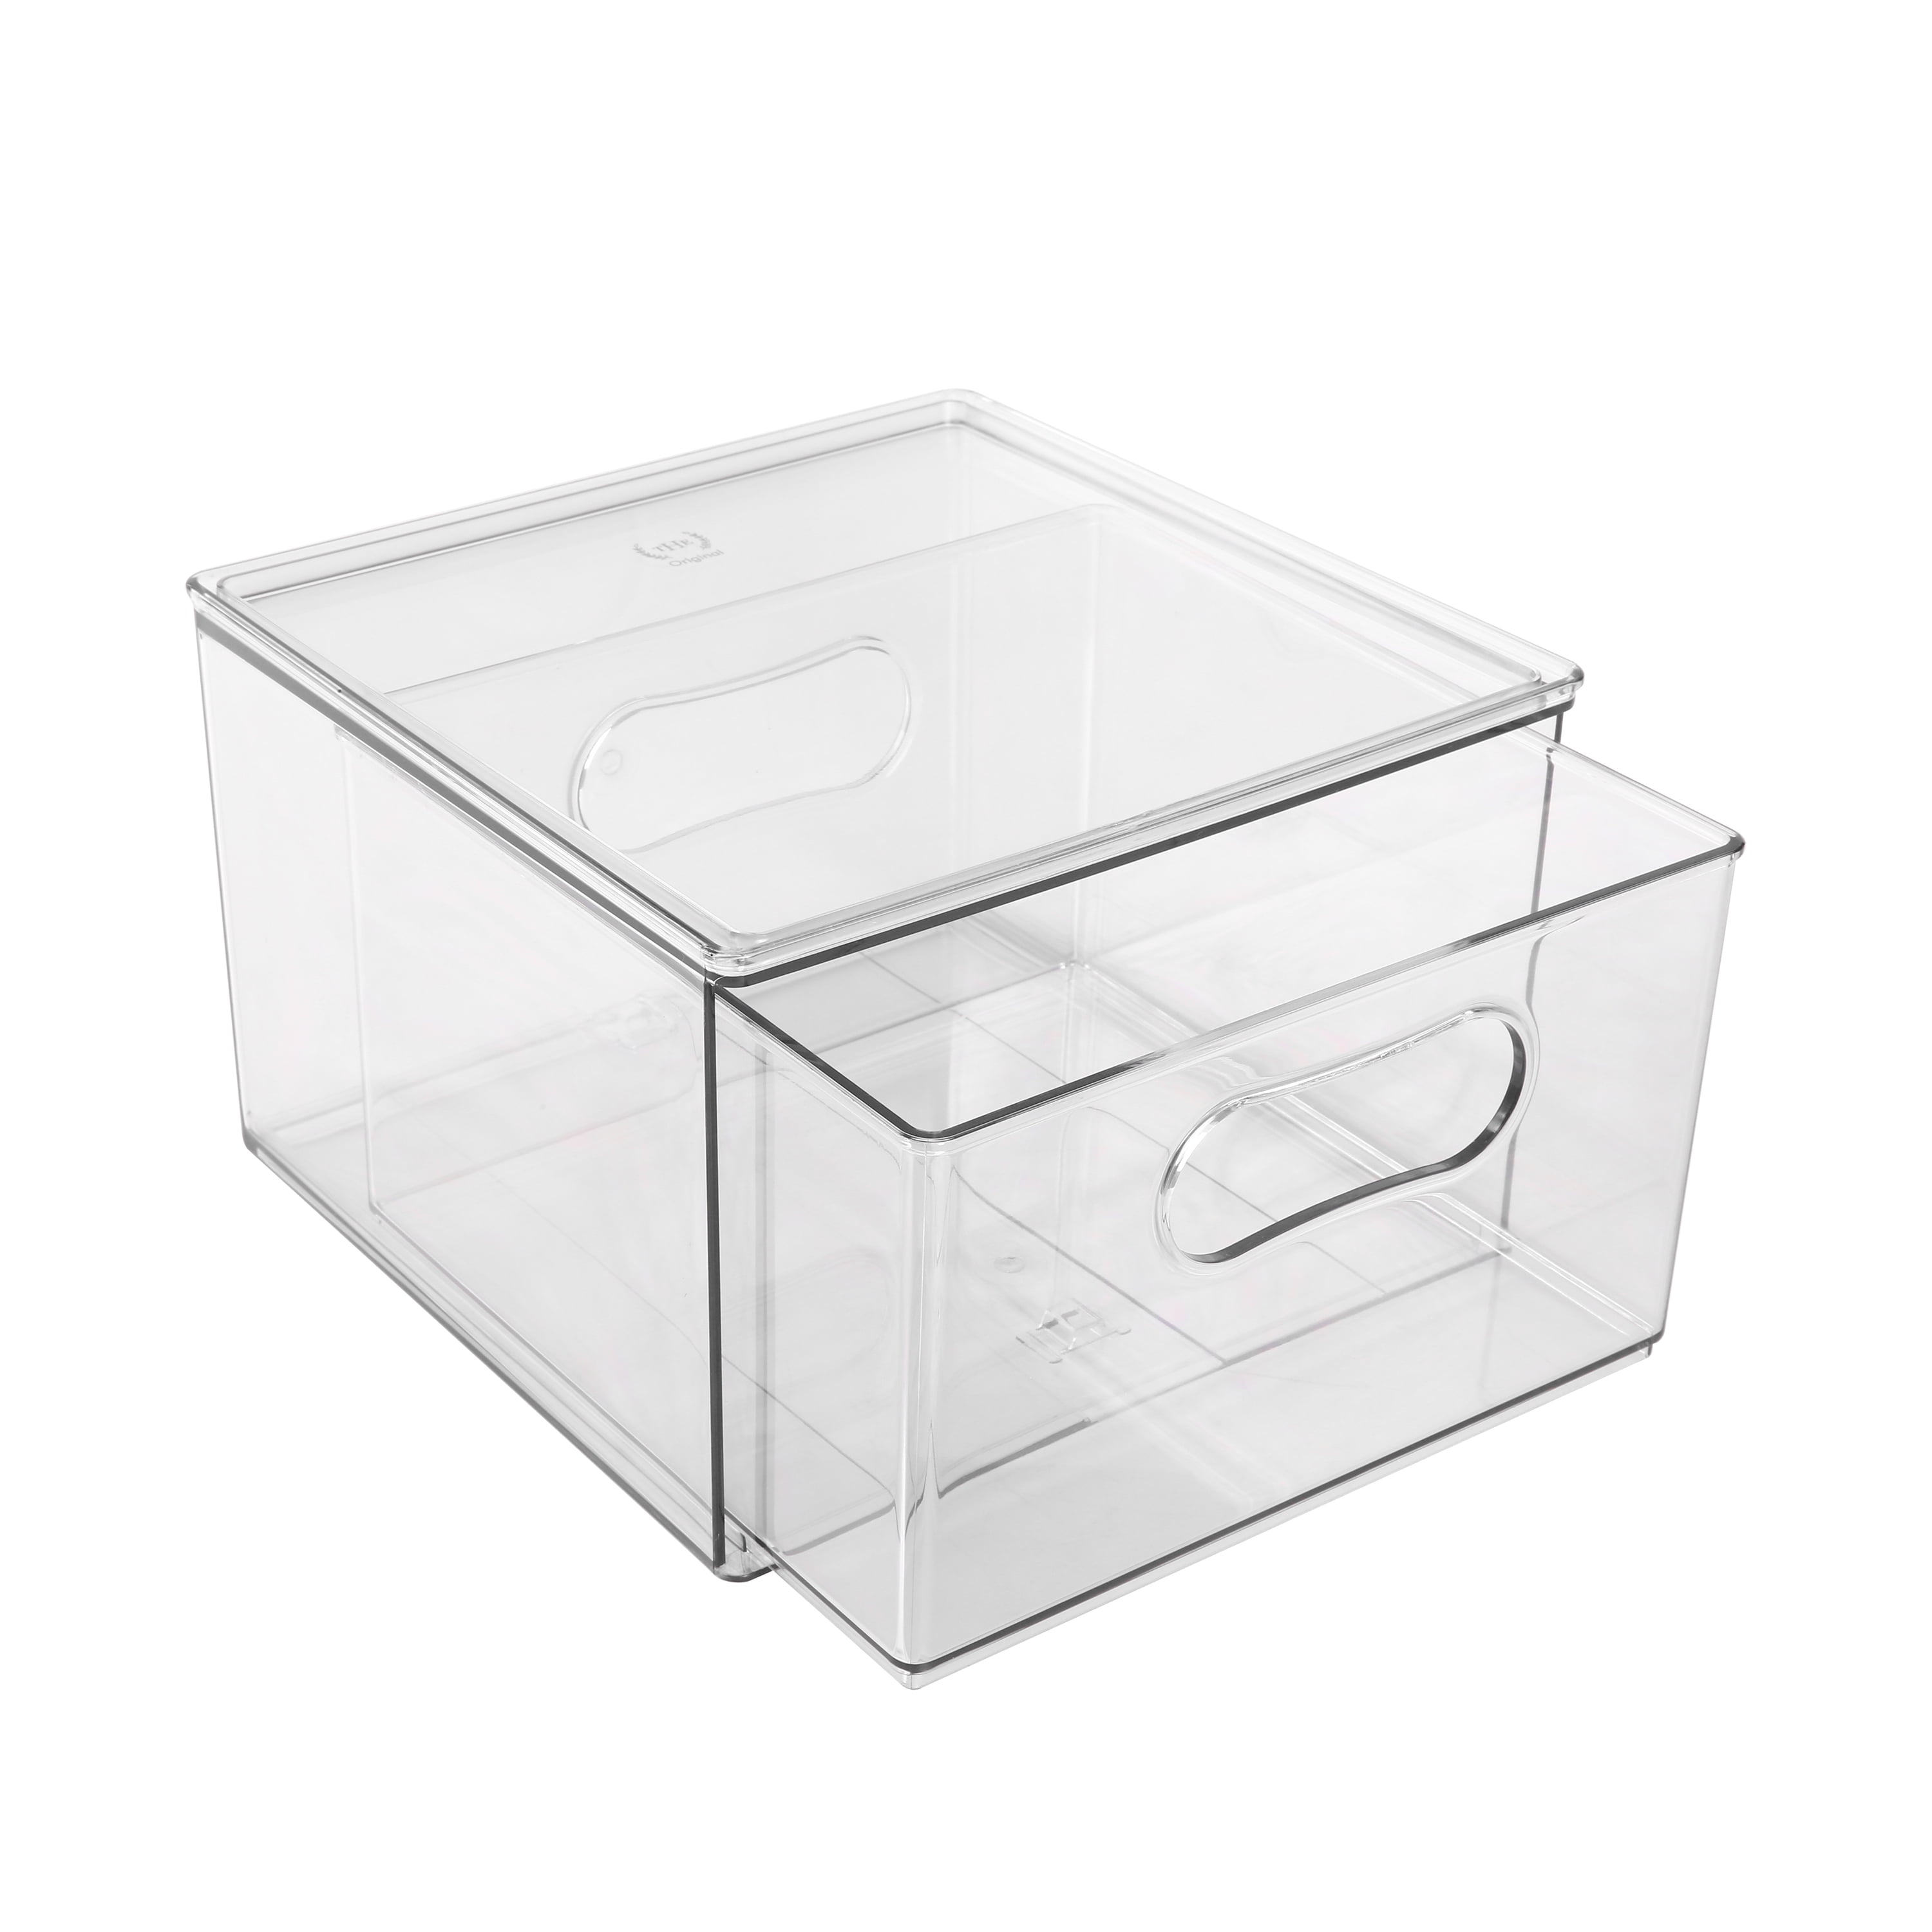  Set of 8 Large Clear Plastic Storage Bins (8L), Storage  Containers for Pantry Organization and Kitchen Storage Bins,Home Edit and  Cabinet Organizers: Home & Kitchen